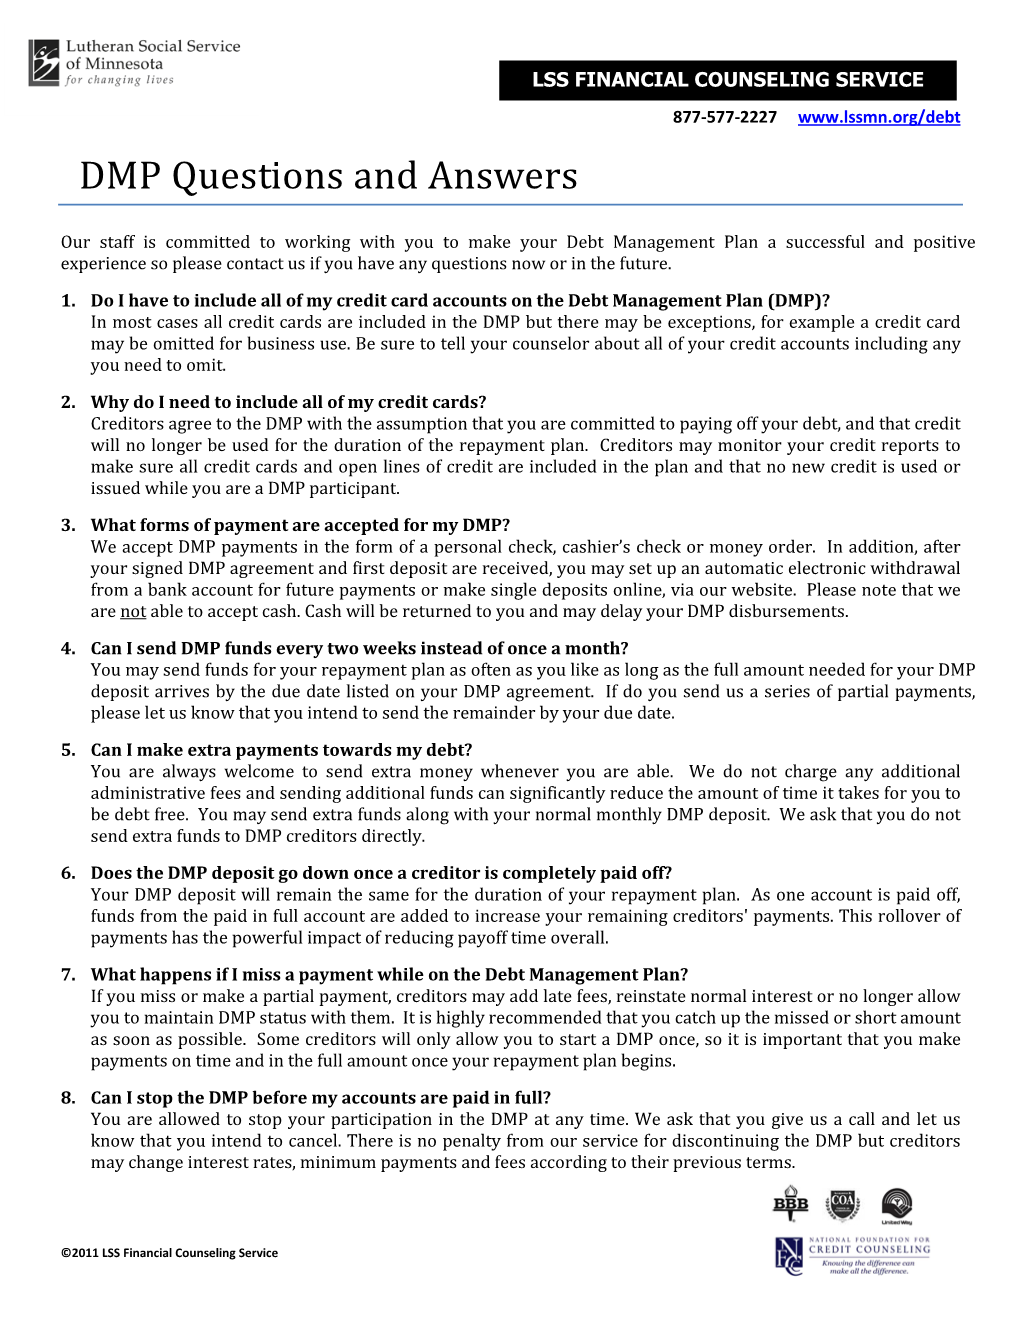 DMP Questions and Answers